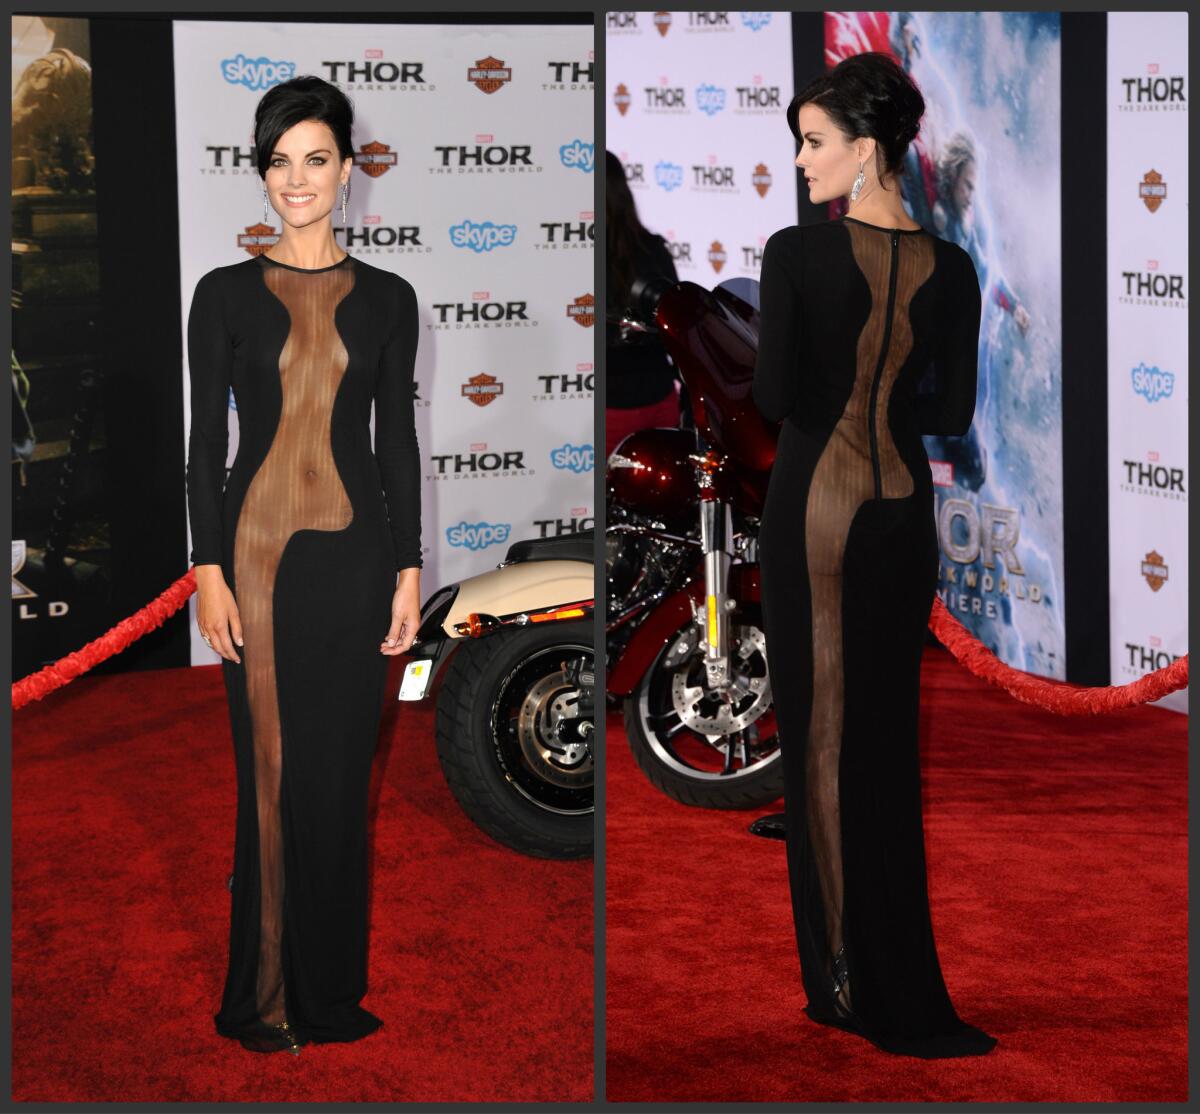 Jaimie Alexander's gown from Azzaro Couture captured attention at Marvel's "Thor: The Dark World" premiere.